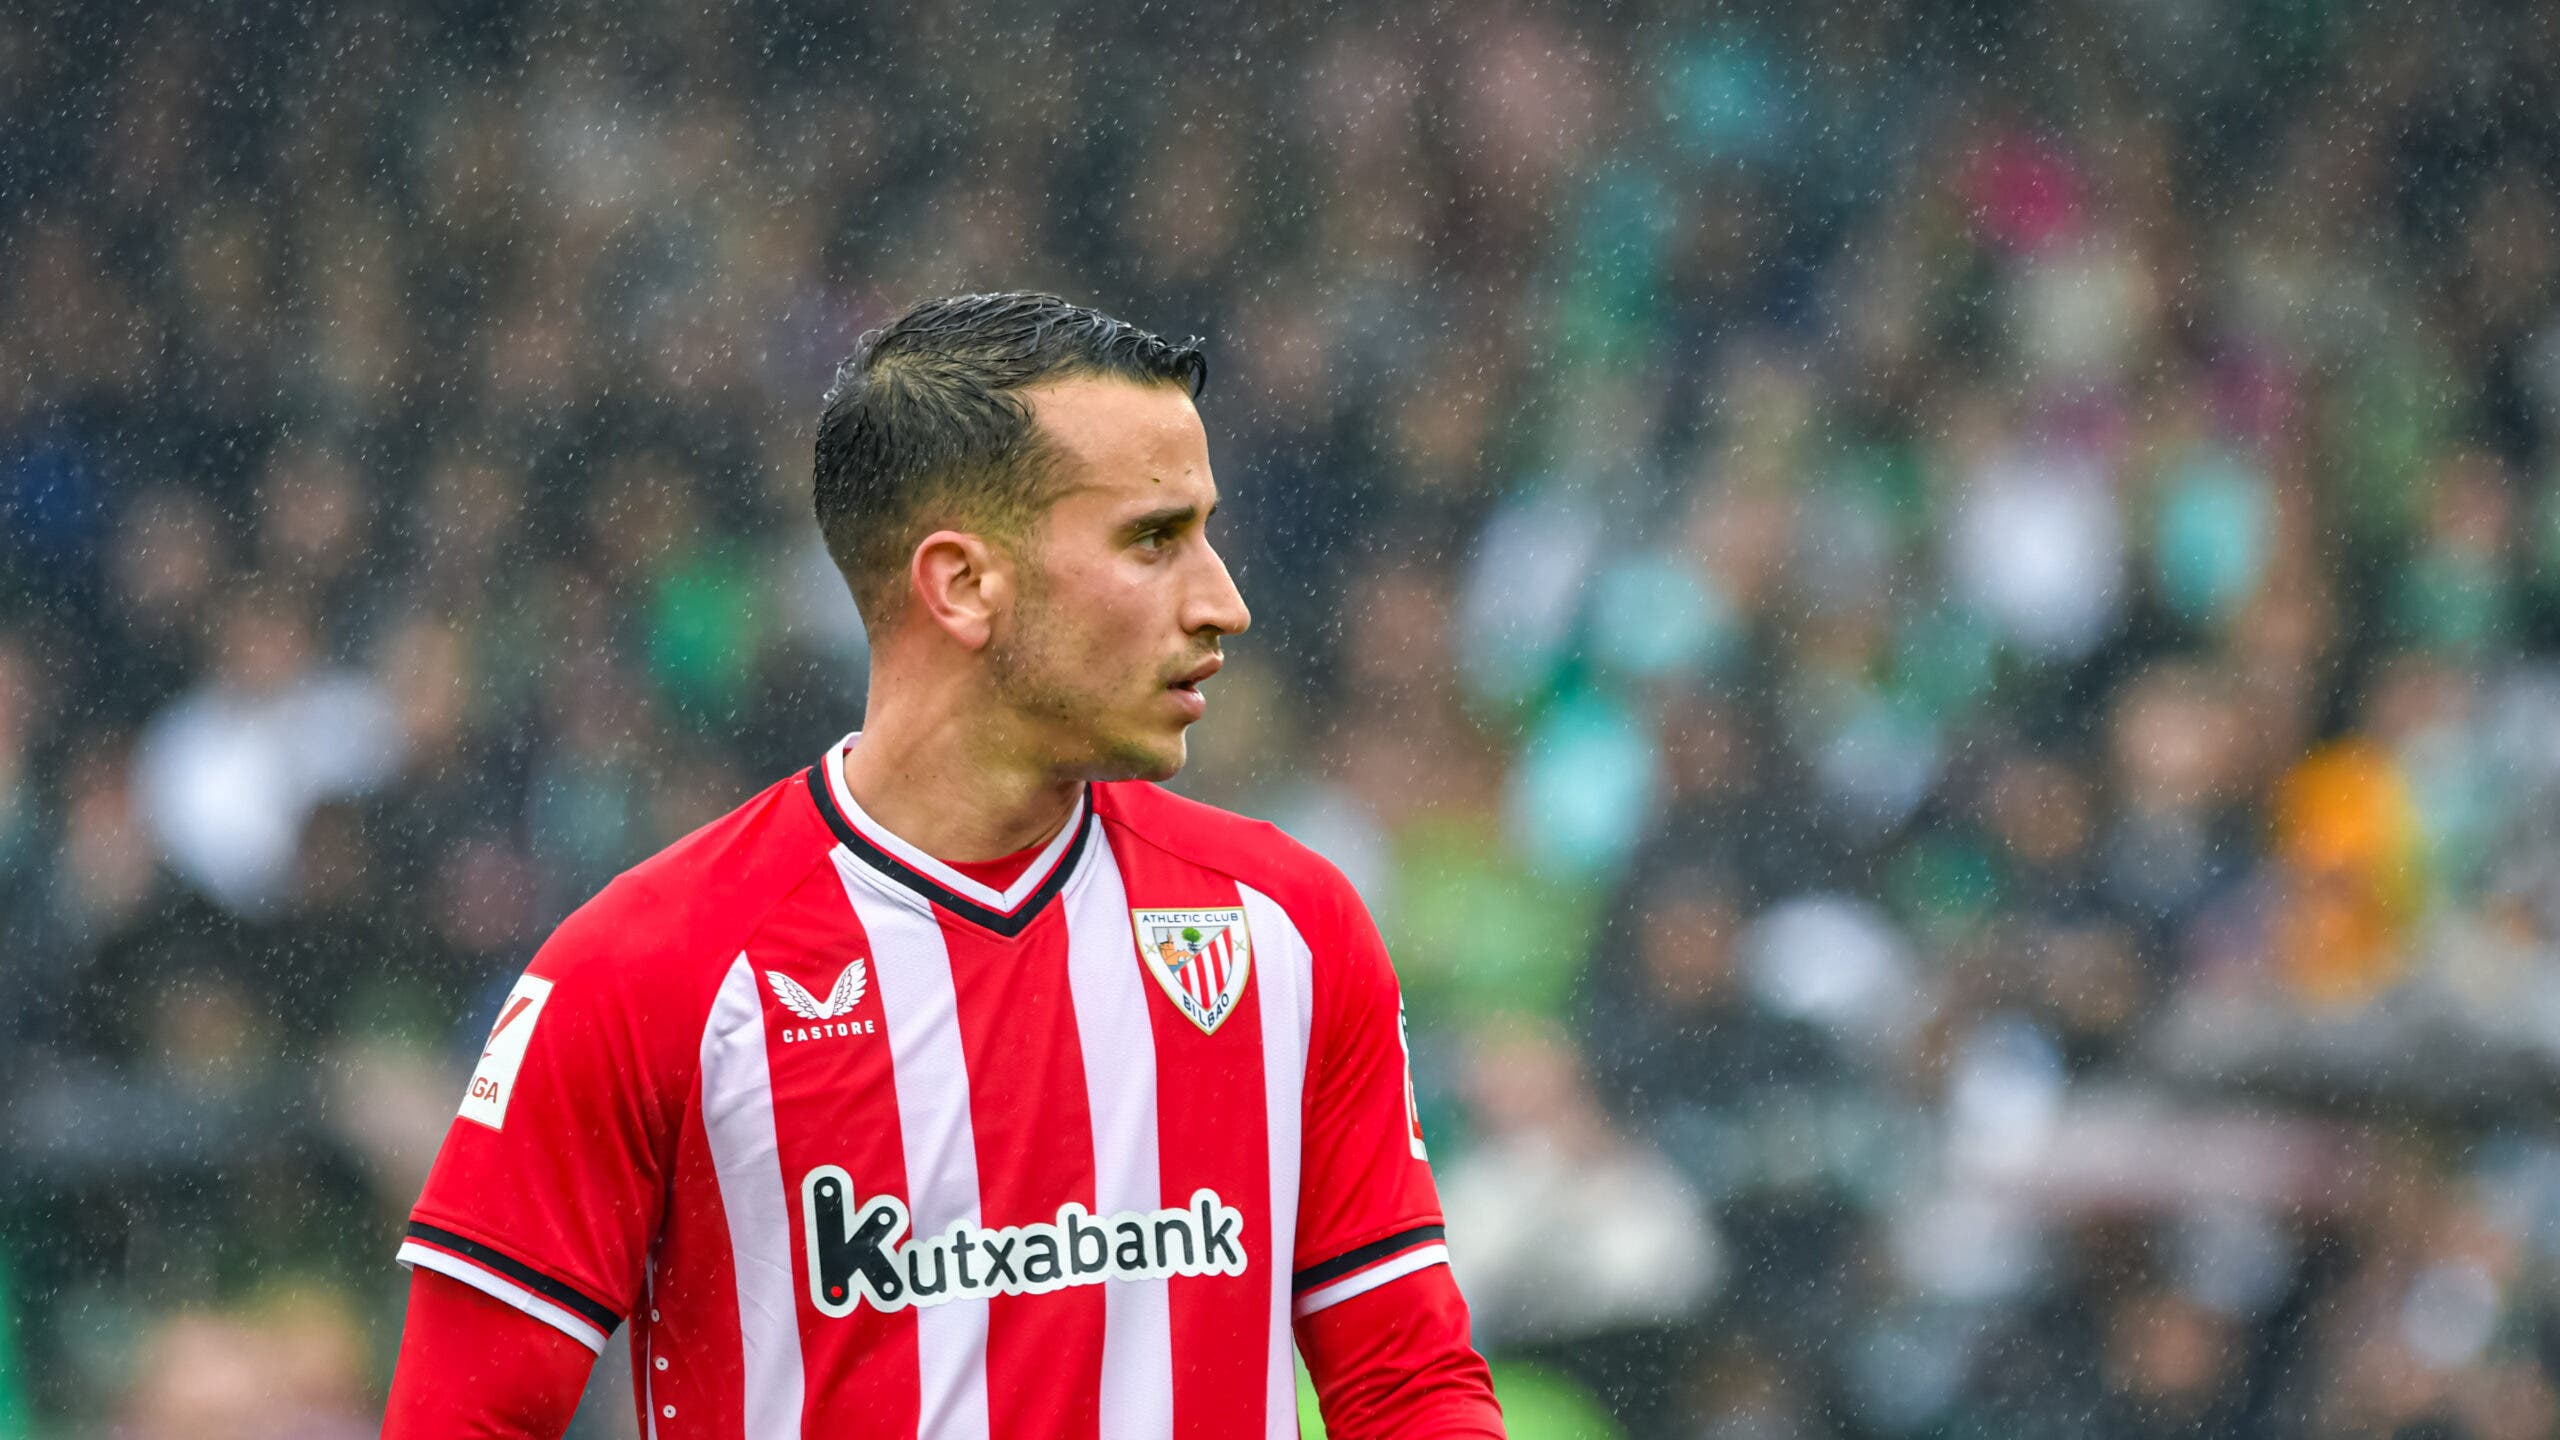 Berenguer makes a decision with Sevilla
	

